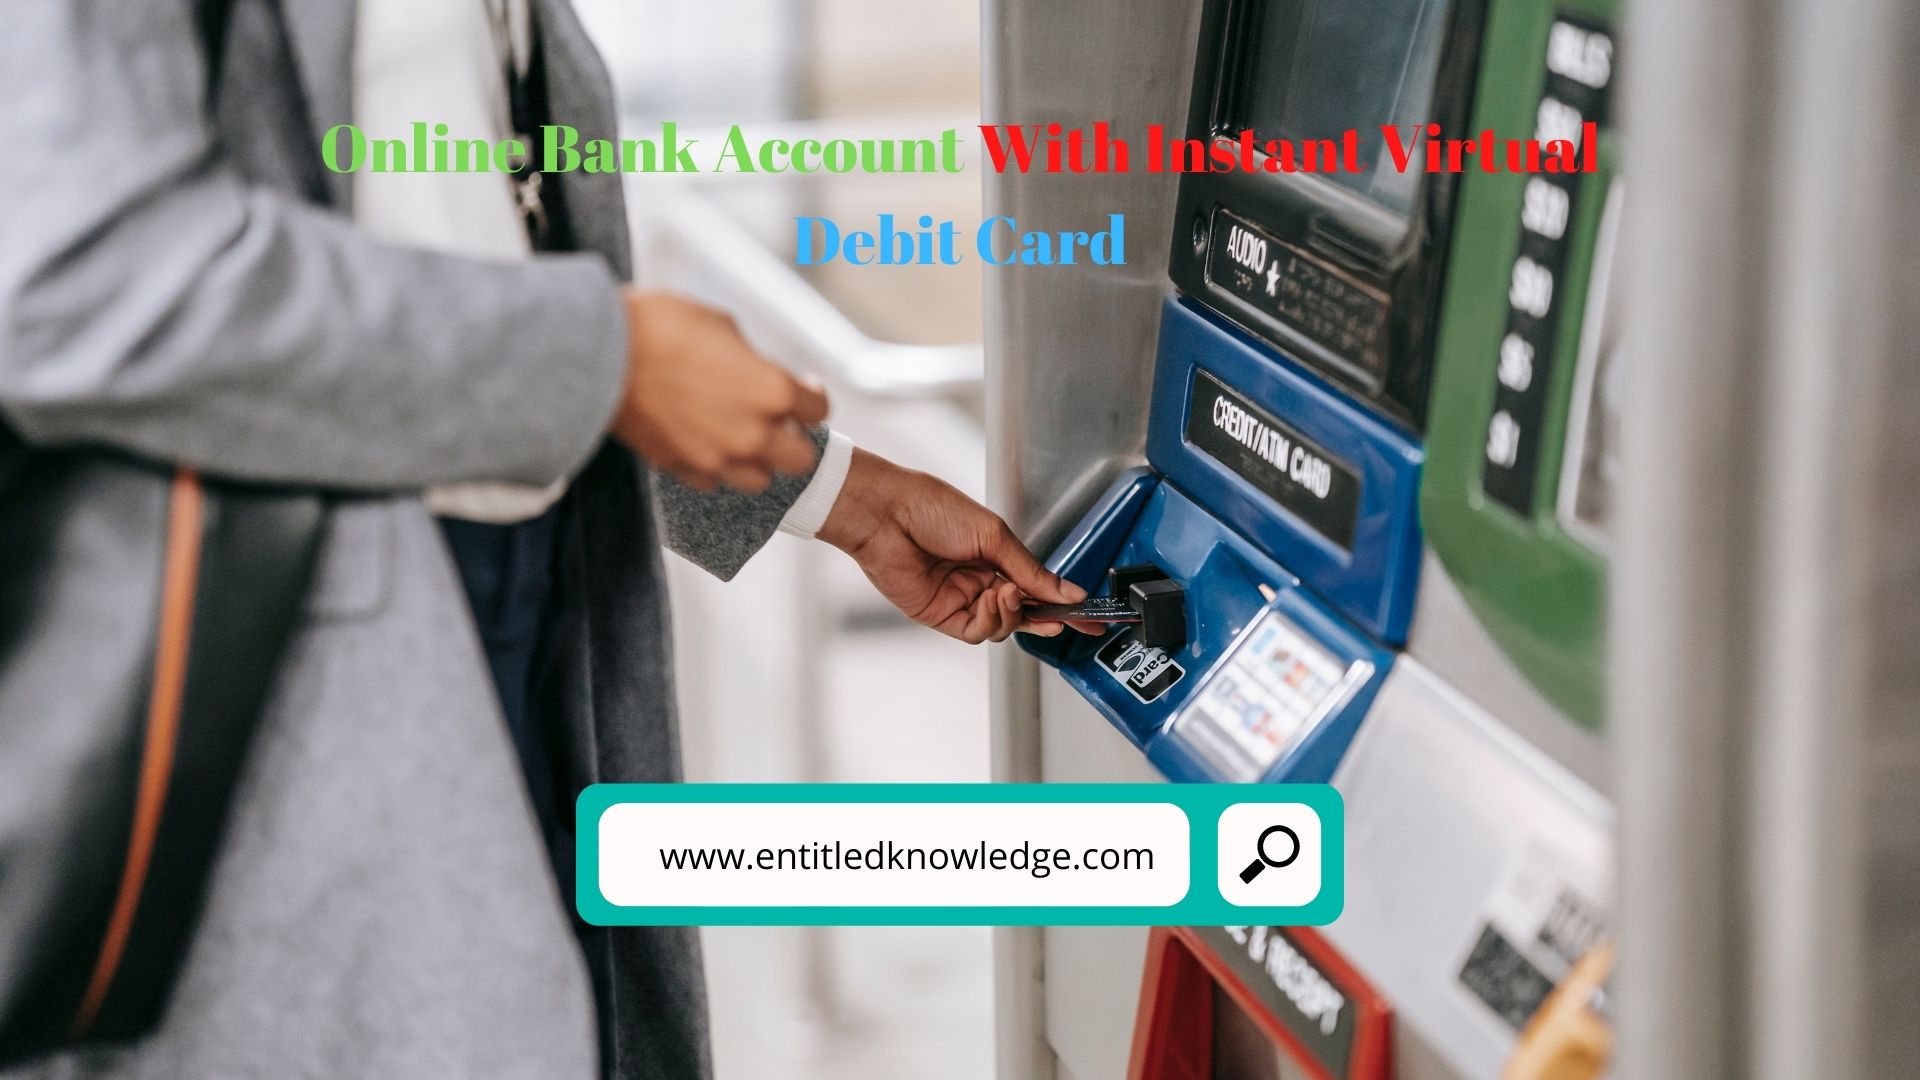 Online Bank Account With Instant Virtual/Debit Card